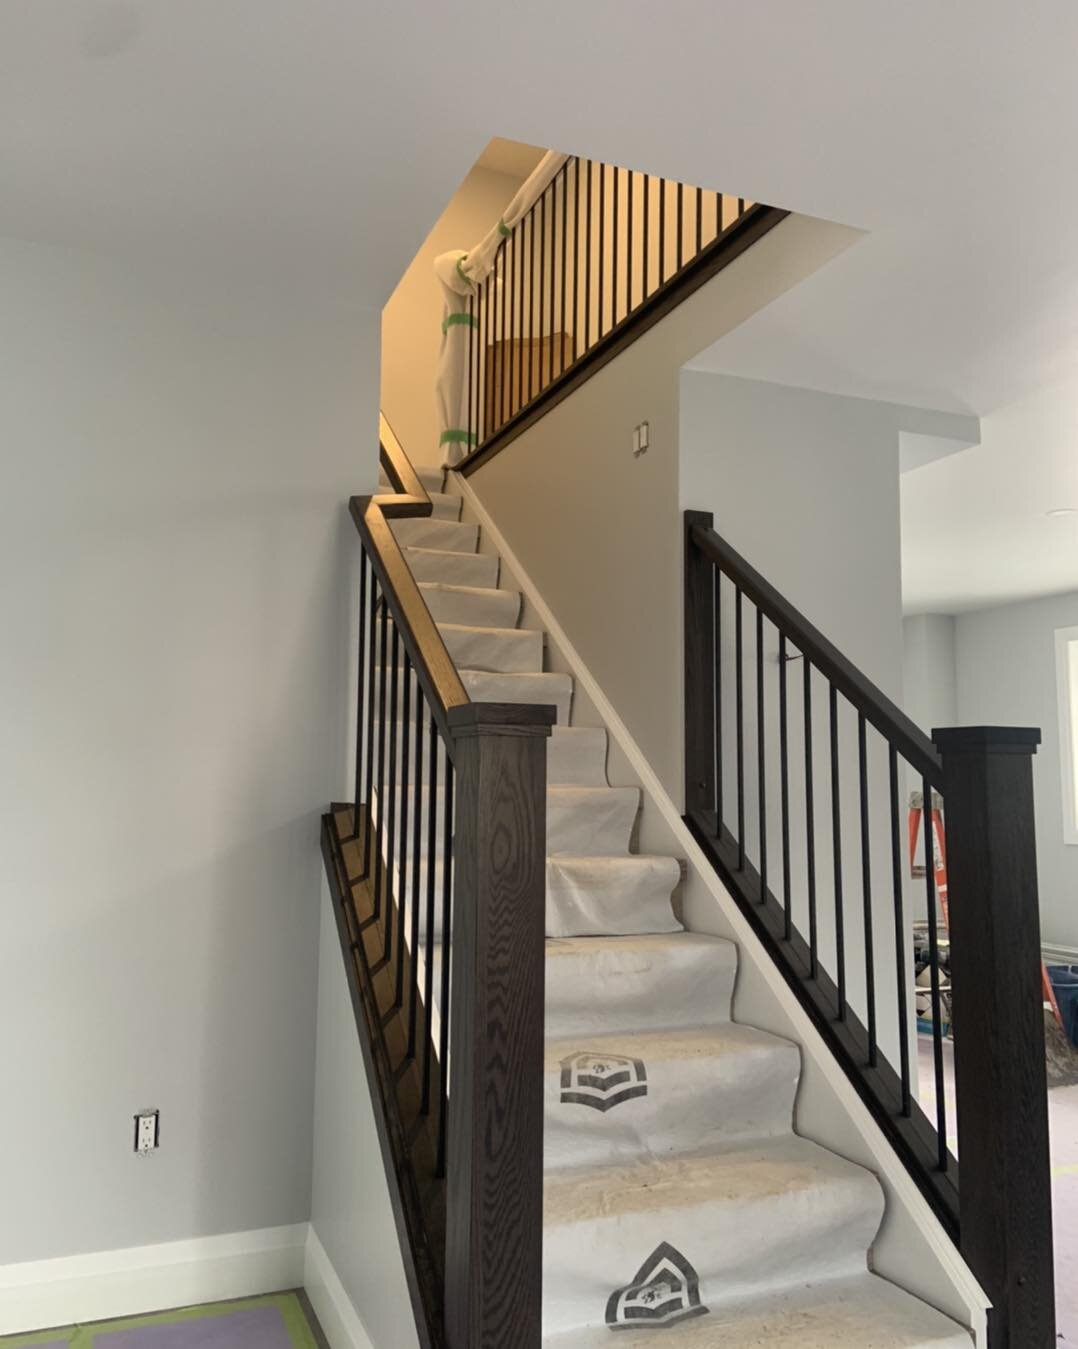 Few things are more satisfying that a super solid set of stairs and rails.  When the stairs don&rsquo;t squeak and the pickets don&rsquo;t rattle and the posts are solid.  Of course they have to look good too.  All of the above&hellip;achieved.